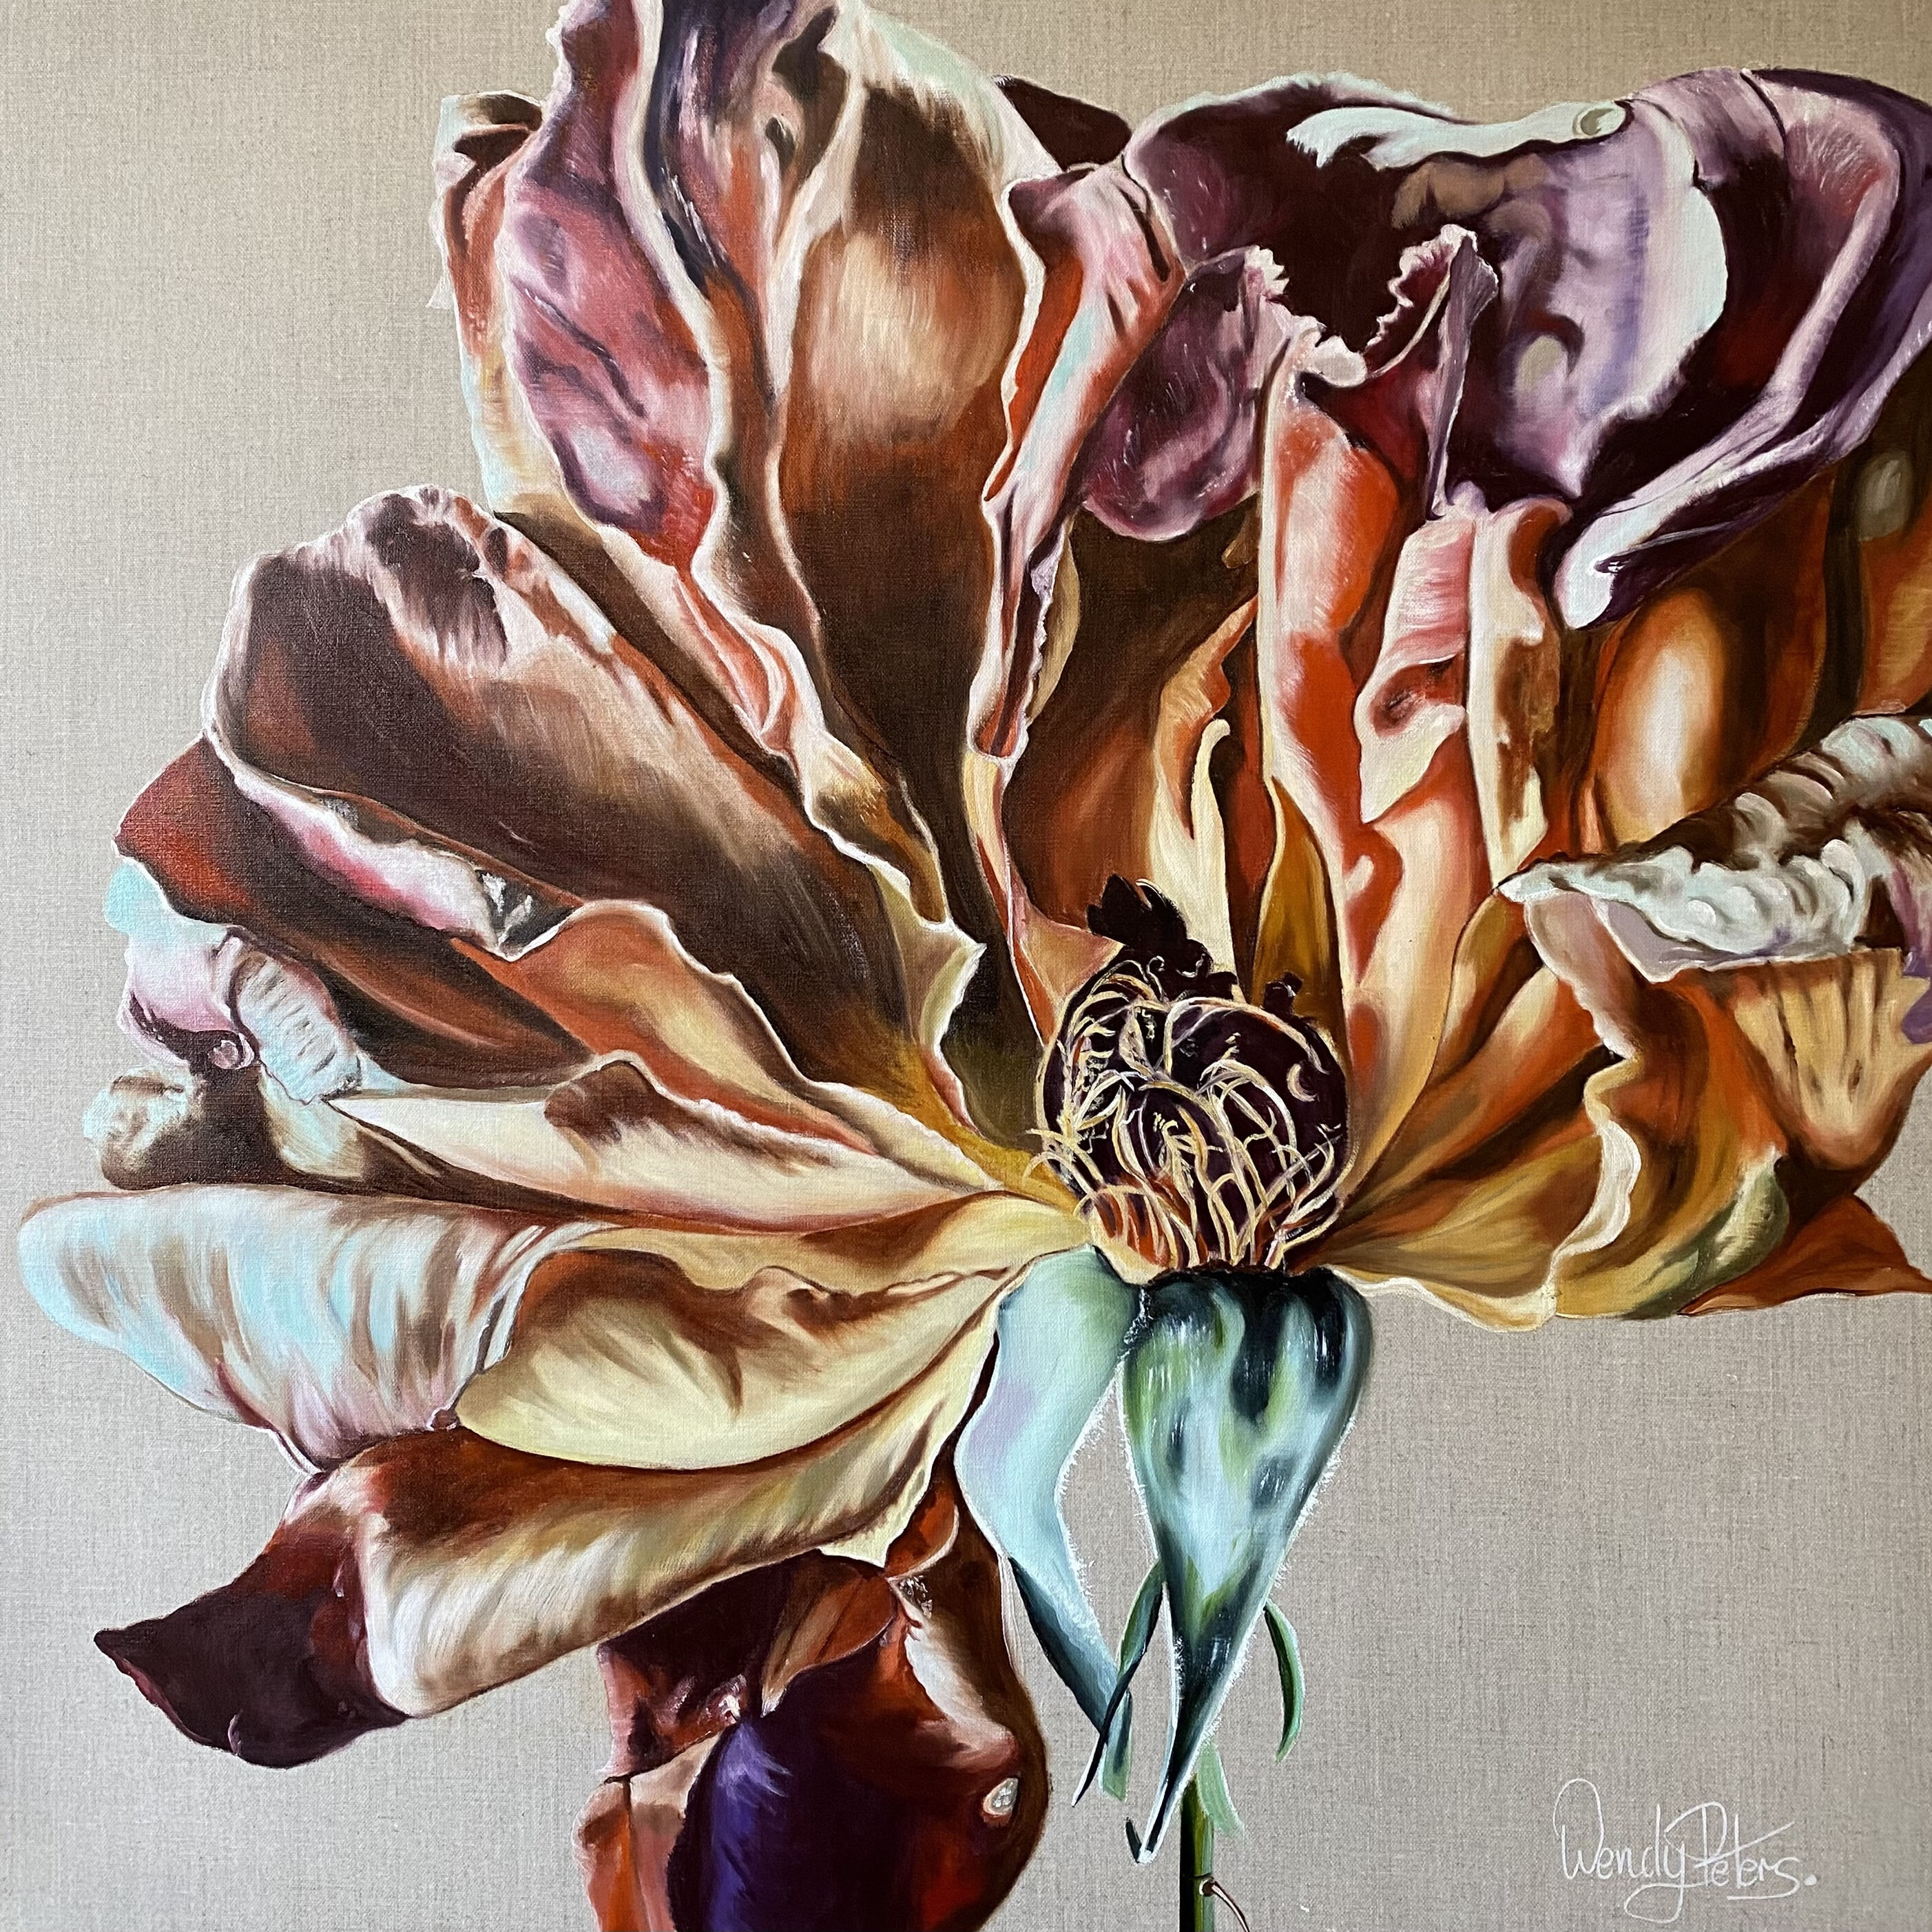 Rose_exquisite_oil_76x76_wendy_peters